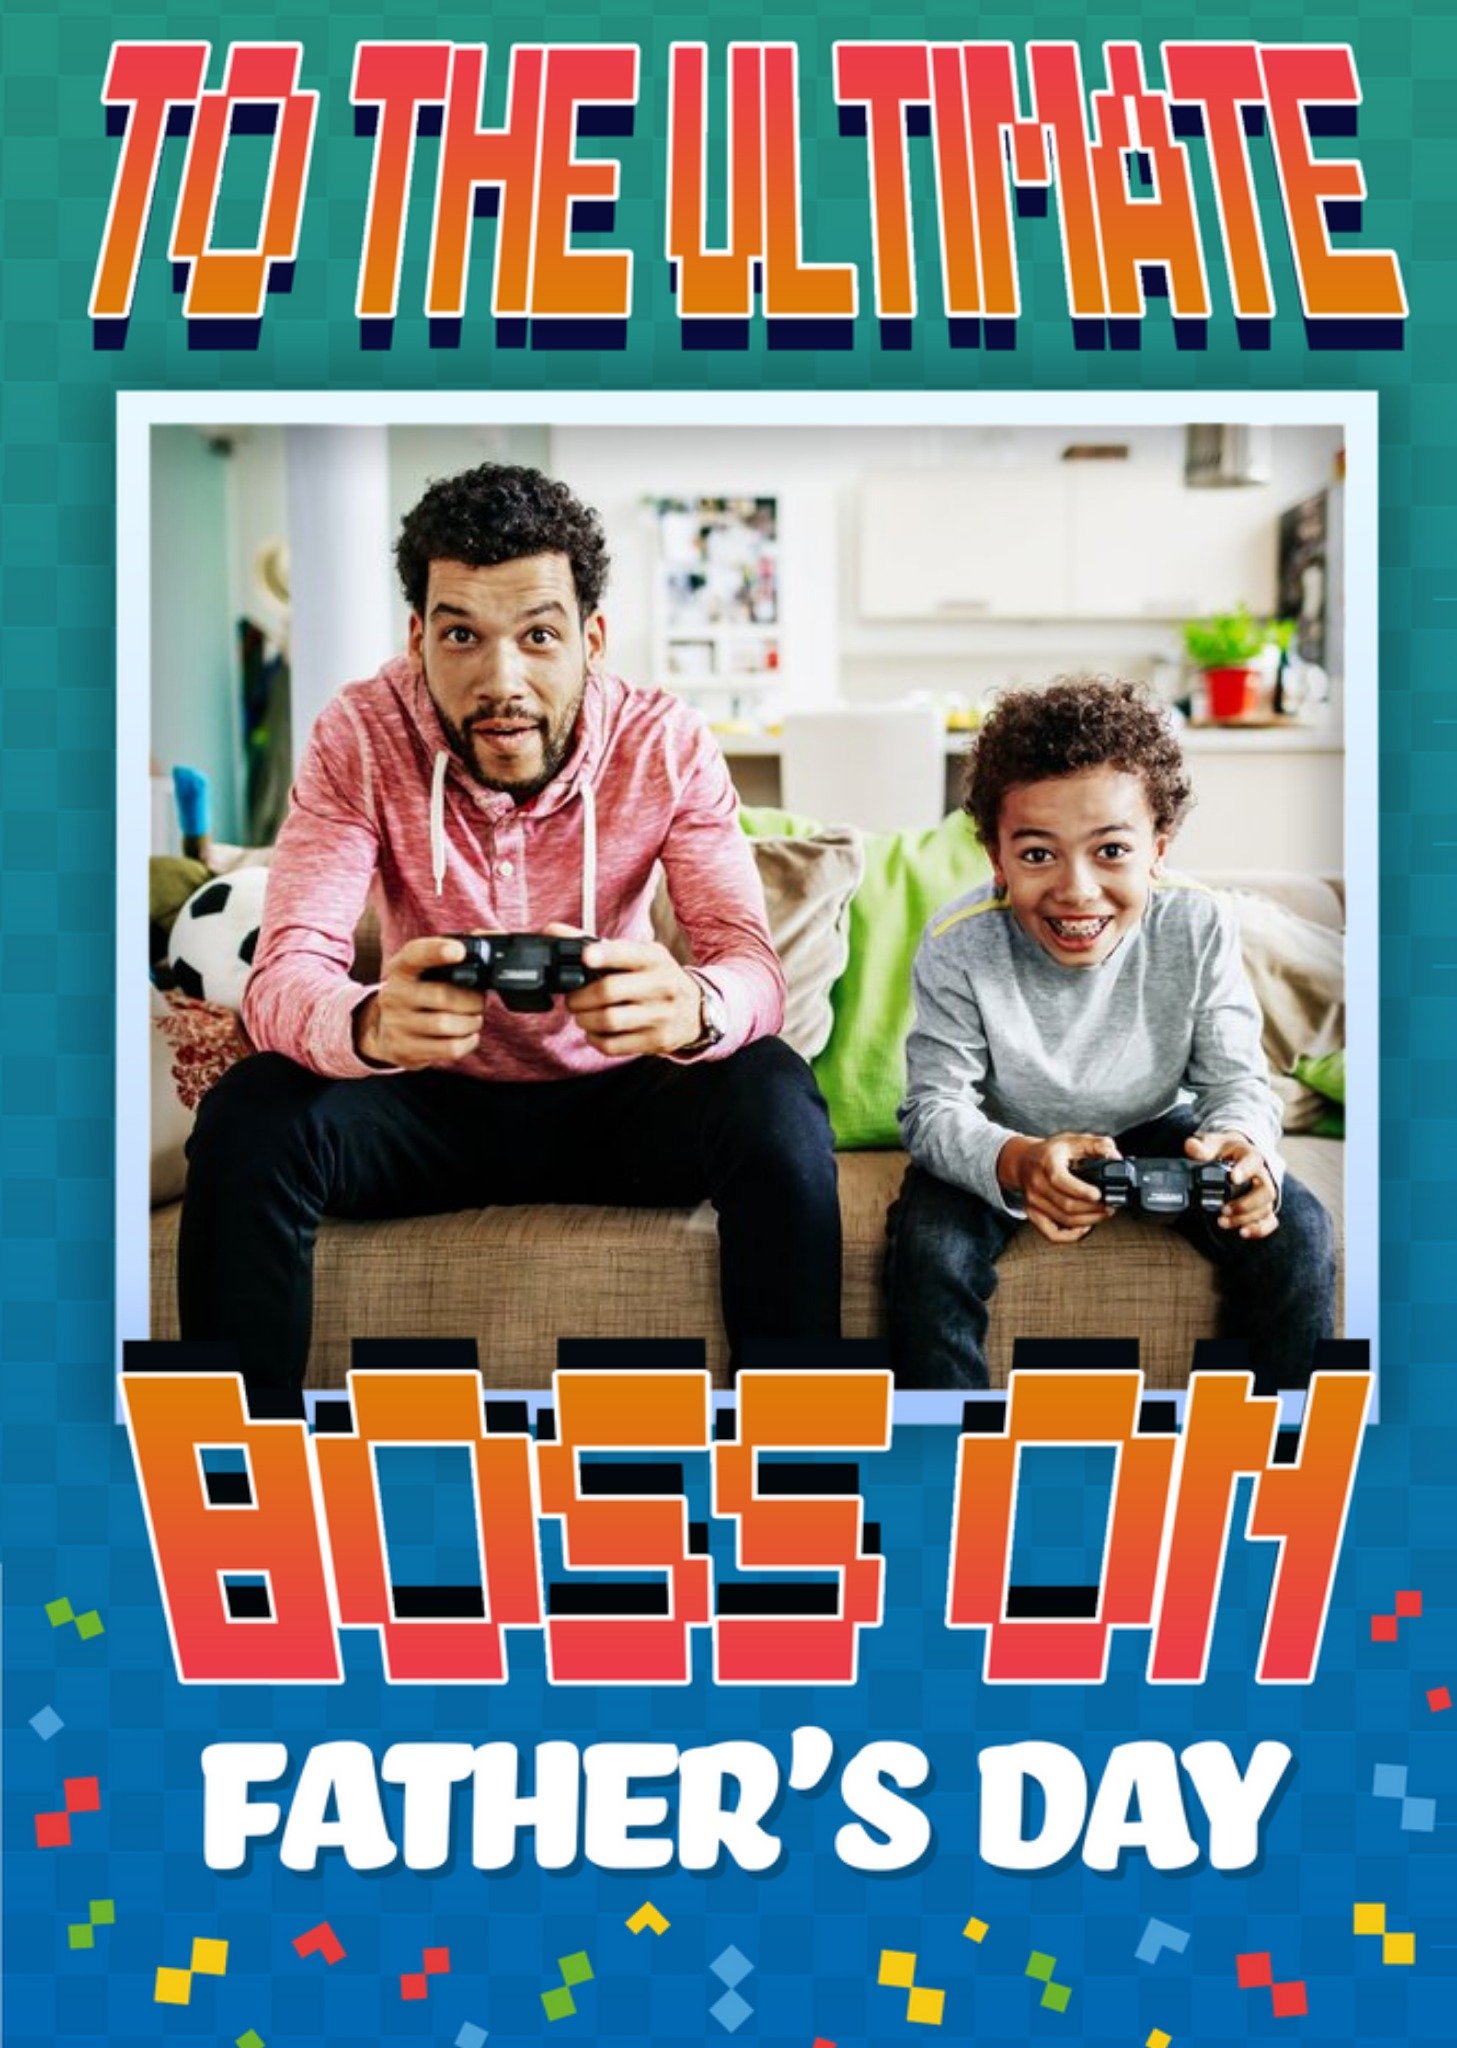 Moonpig Pixel Gaming To The Ultimate Boss On Fathers Day, Large Card